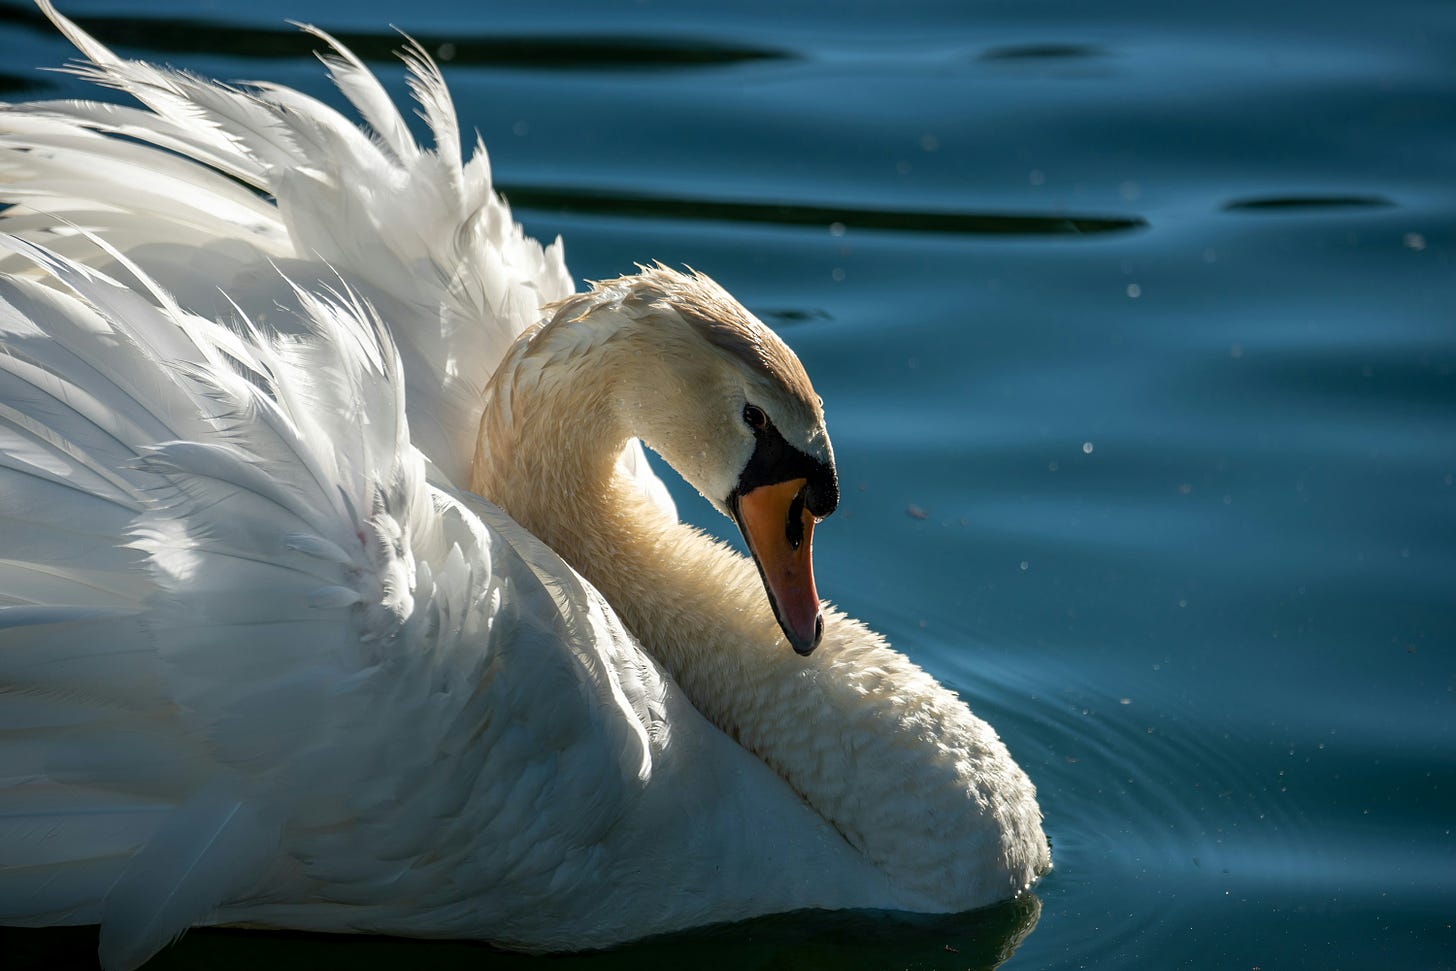 Closeup portrait of a pissed-off looking swan, its feathers flaring, its side eye extreme.